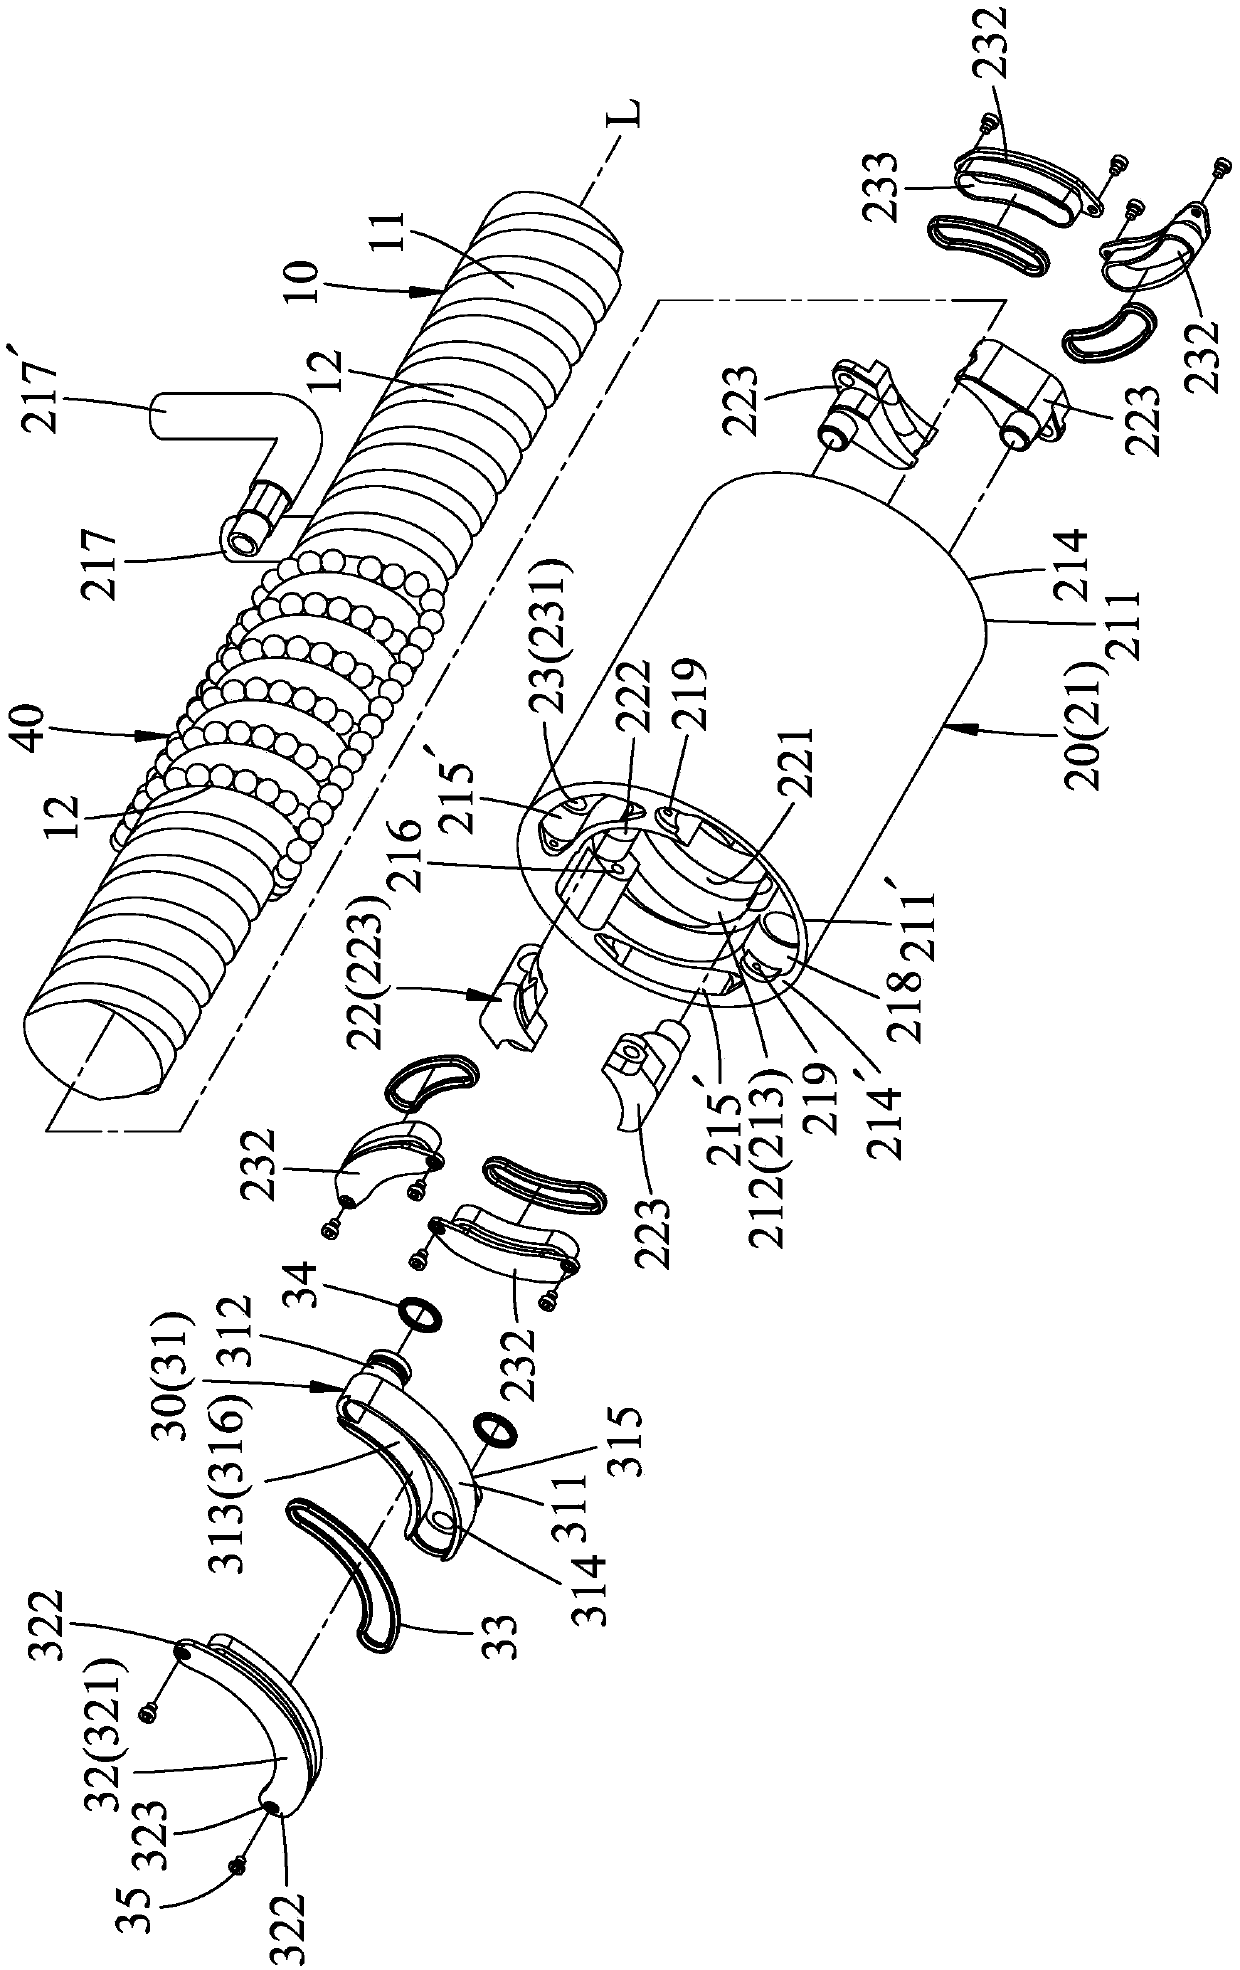 Cooling type ball screw device capable of being used for multi-thread opening circulation